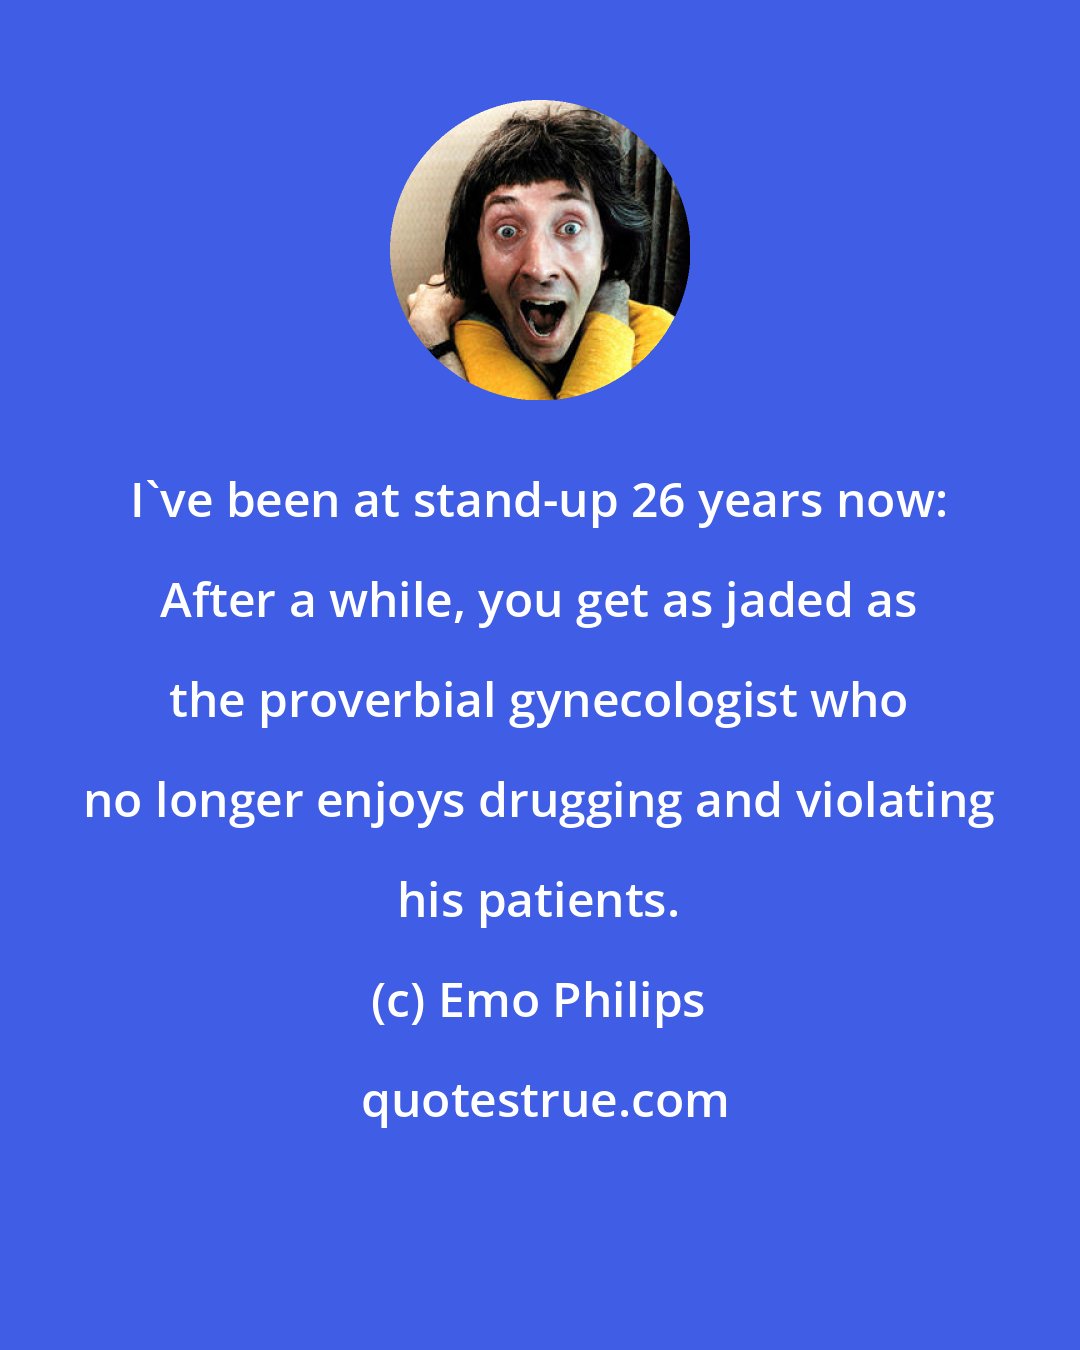 Emo Philips: I've been at stand-up 26 years now: After a while, you get as jaded as the proverbial gynecologist who no longer enjoys drugging and violating his patients.